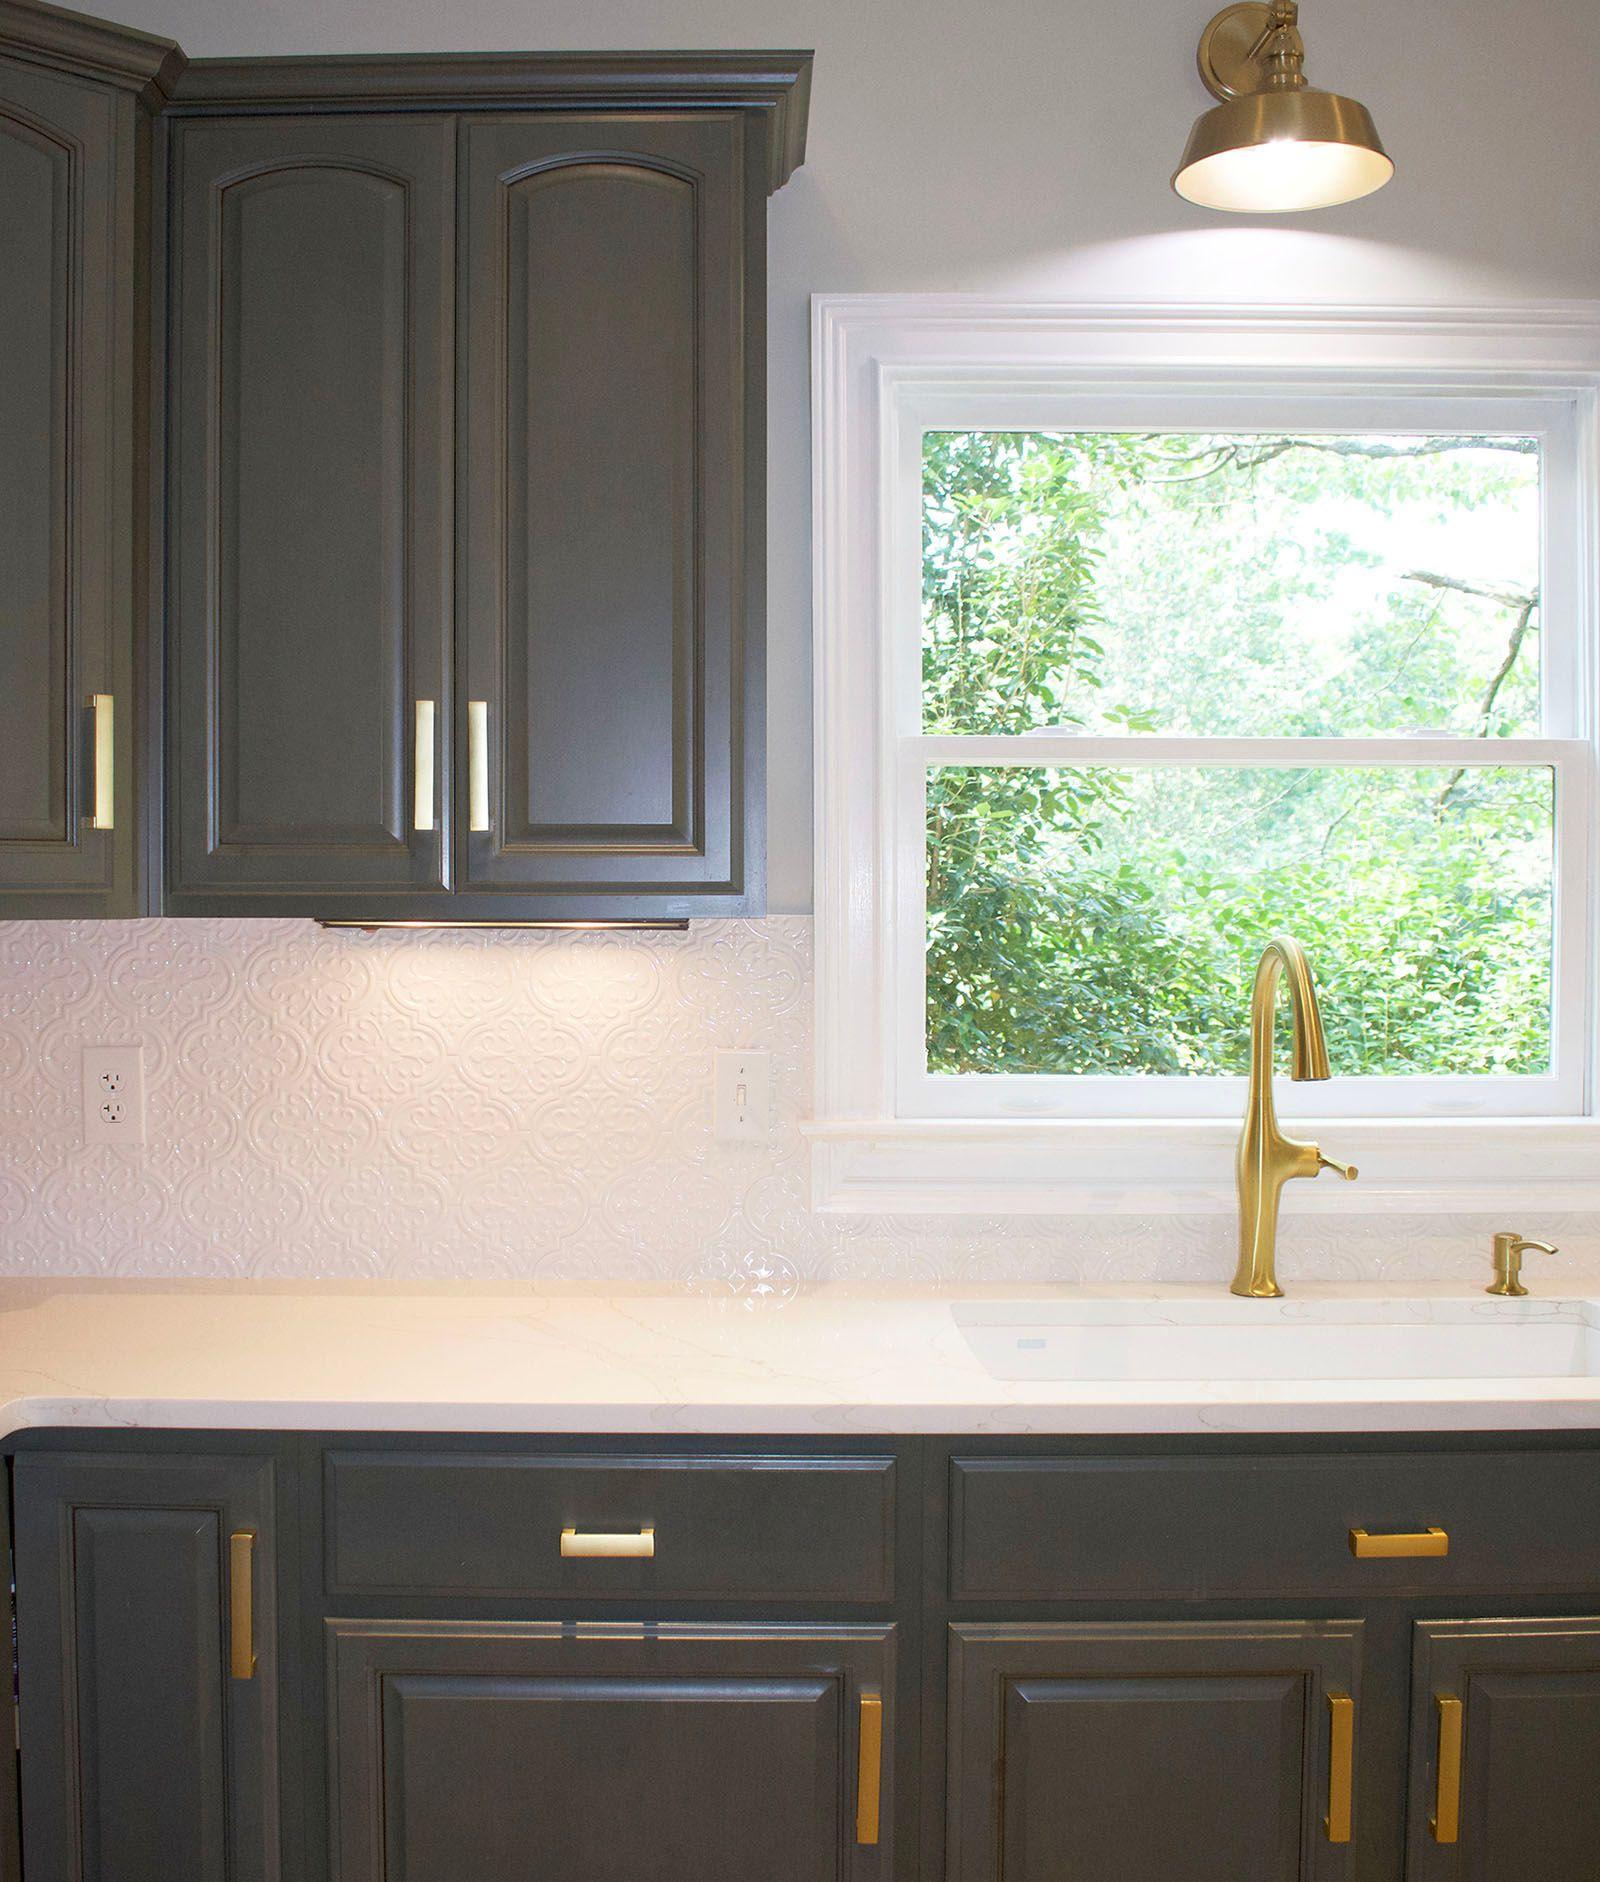 How To Remove Yellow Stains On Quartz Countertop? - Kitchen Cabinet